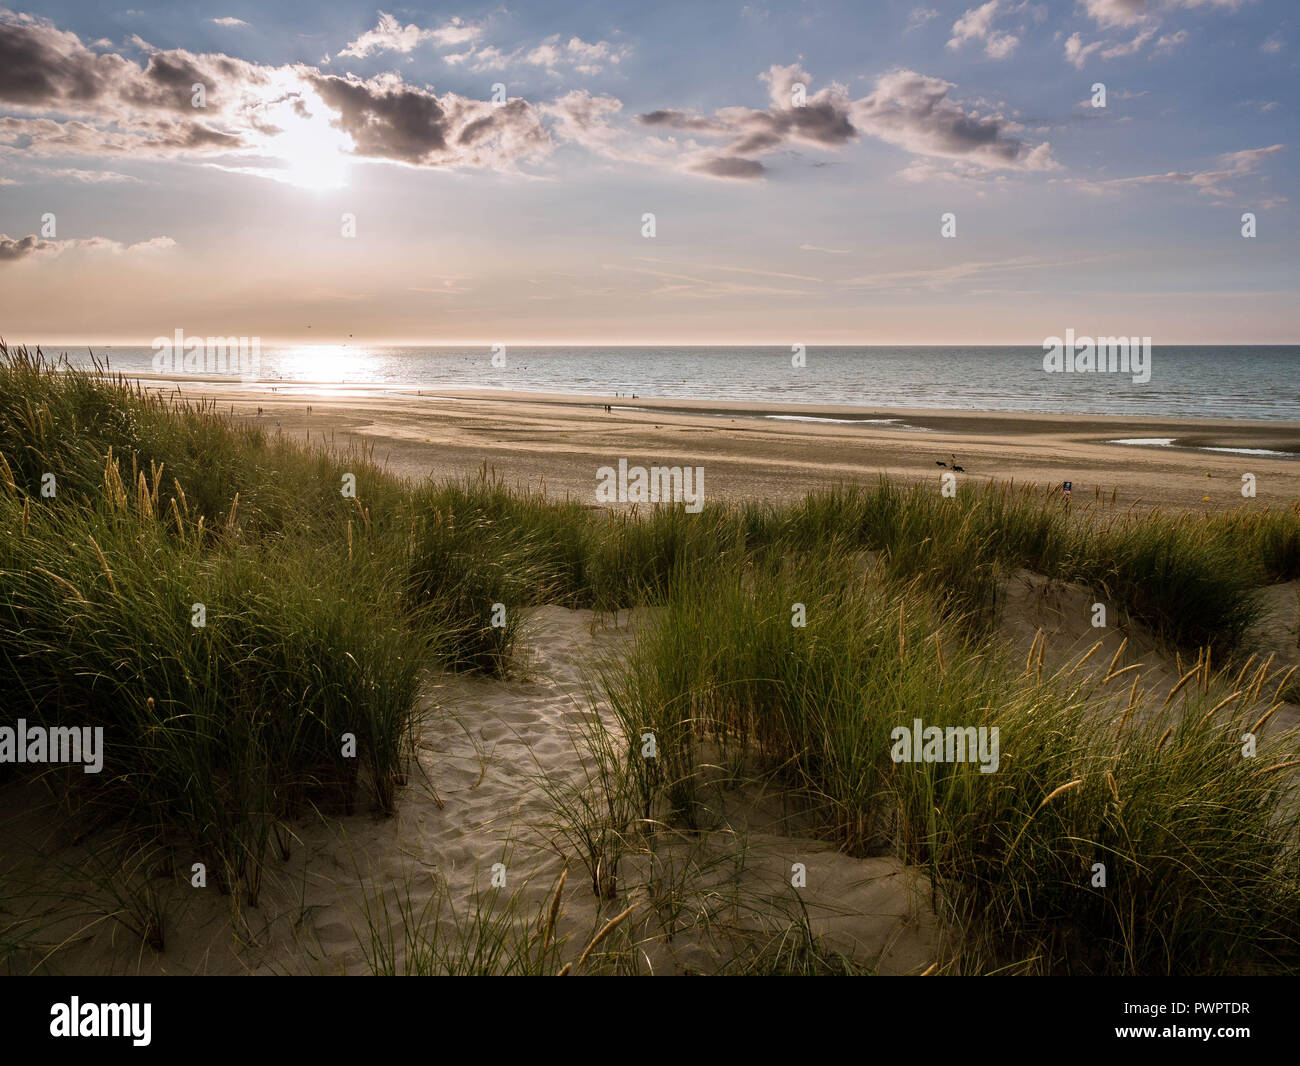 Sand path within marram grass covered dunes leads towards the beach just prior sunset in northern France Stock Photo